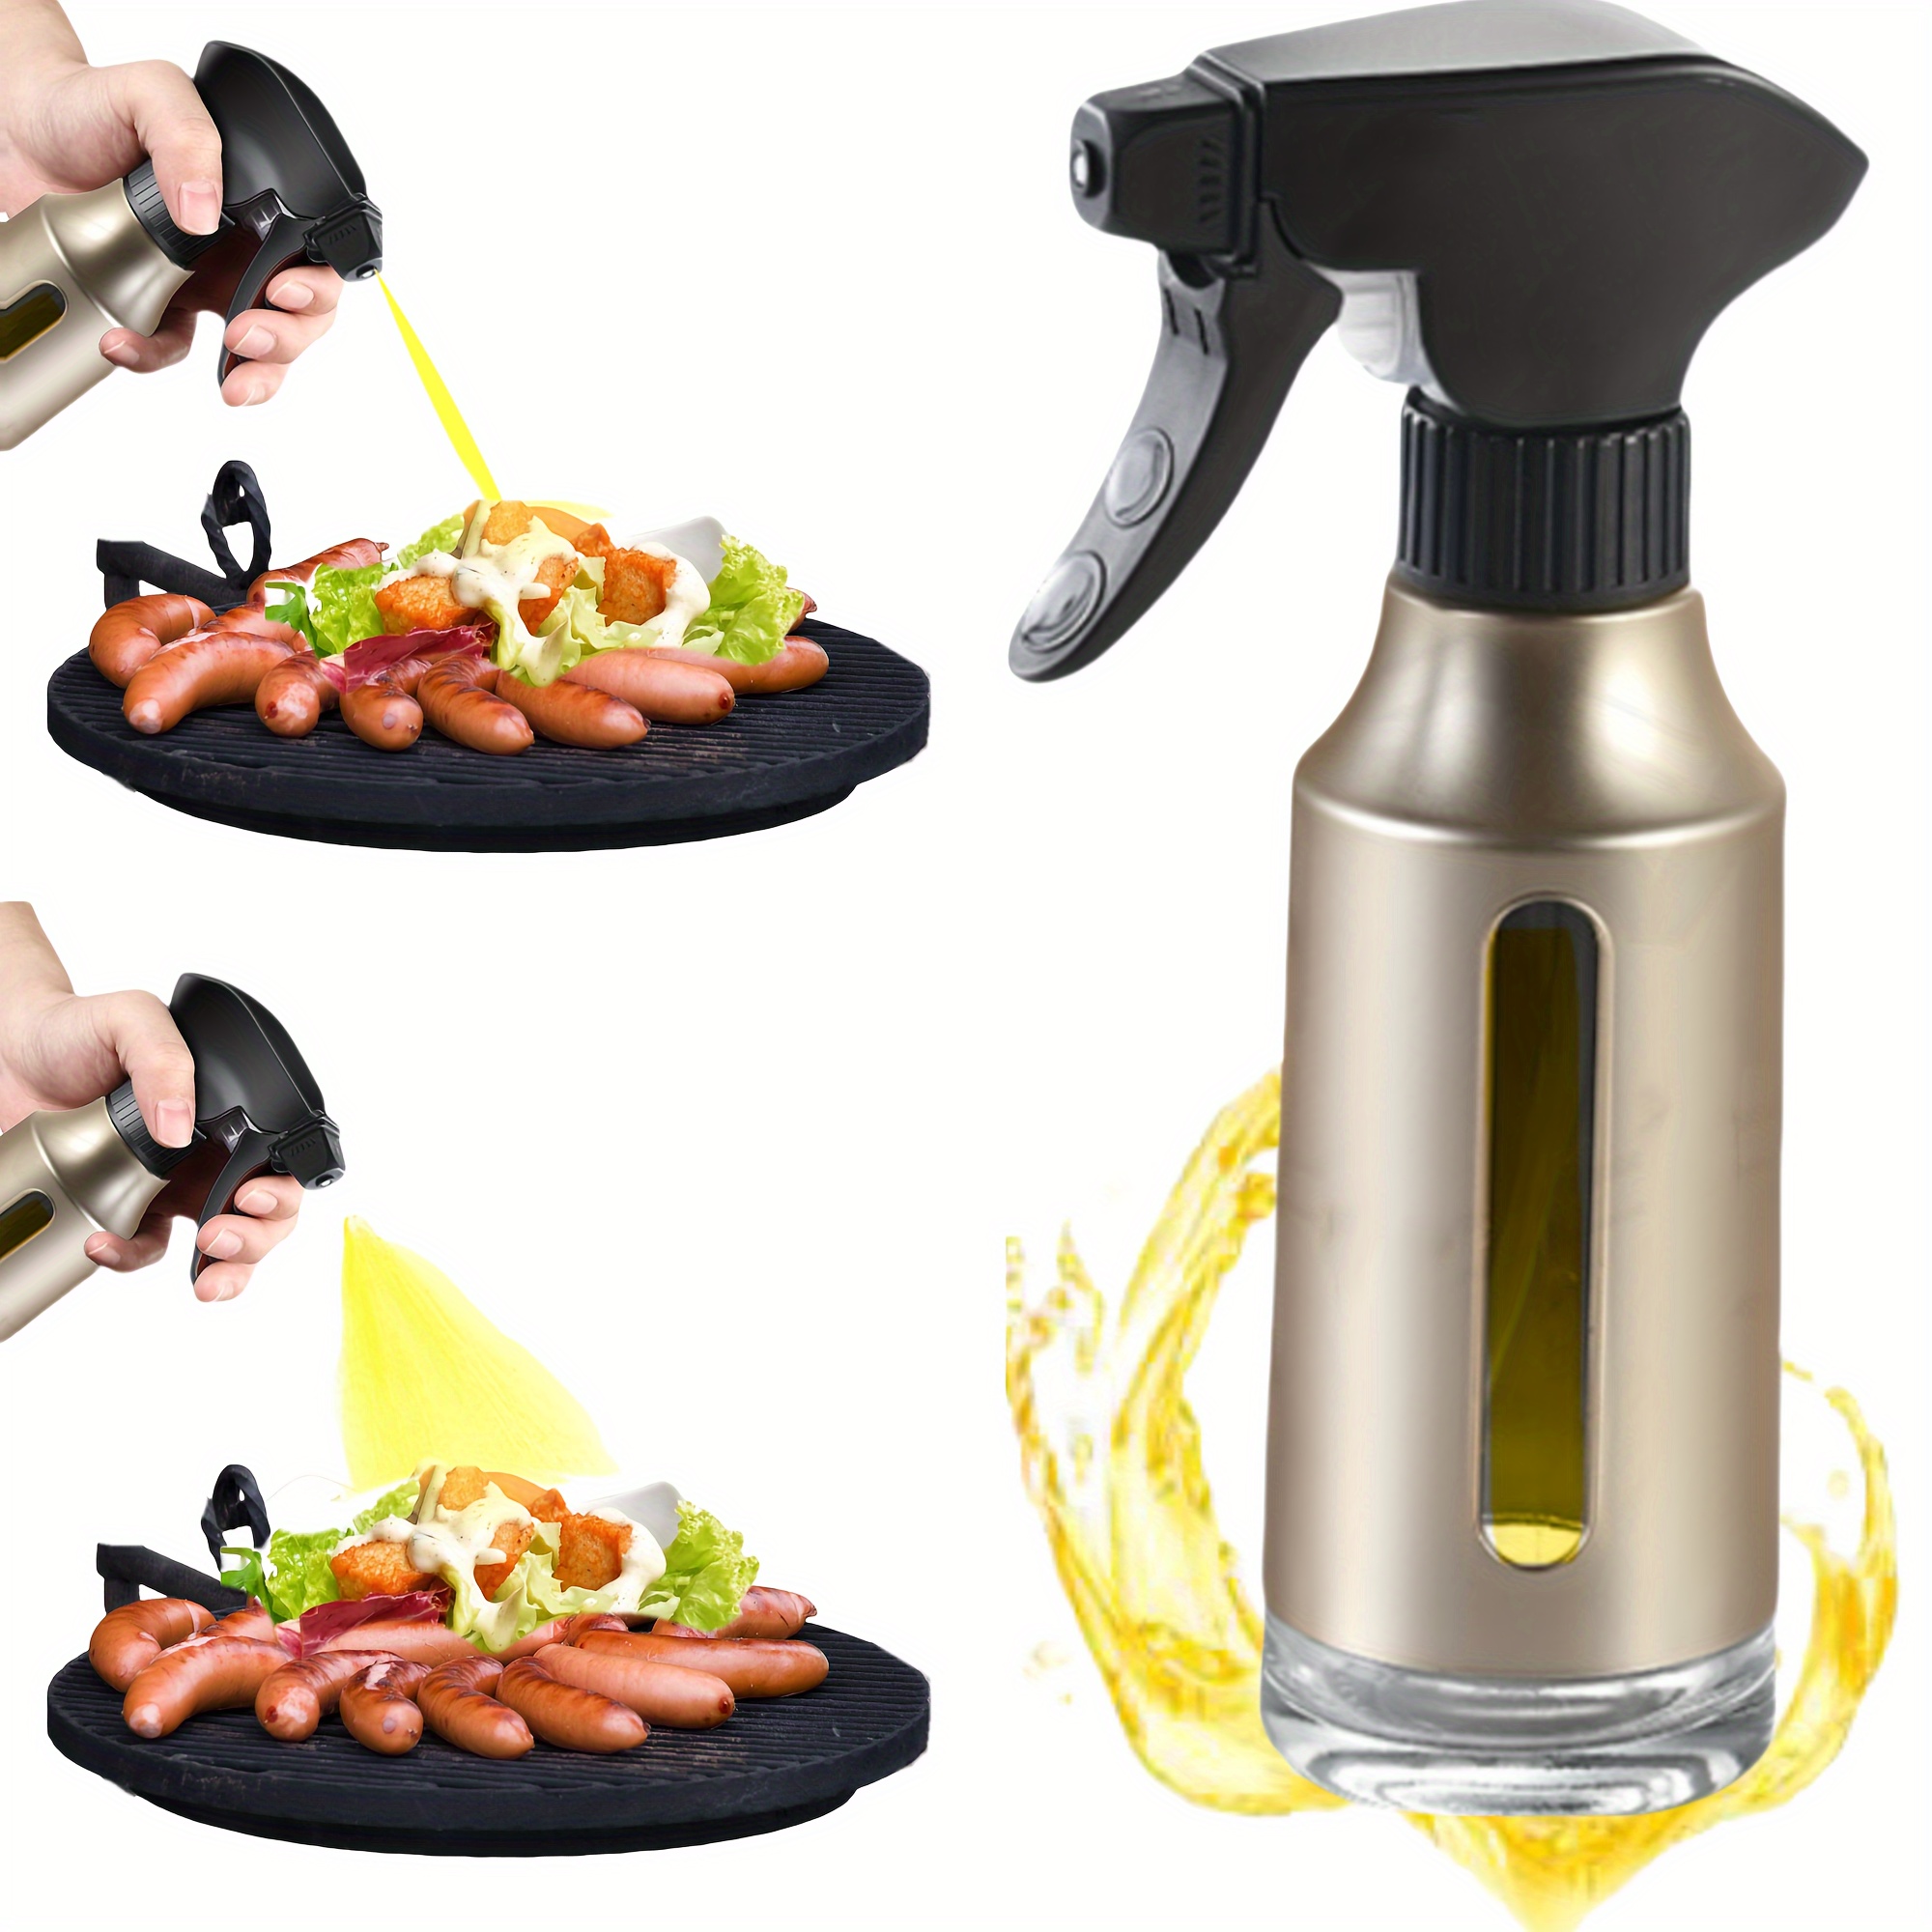 

Oil Sprayer For Cooking, Olive Oil Sprayer Mister, 180ml Oil Spray Bottle For Bbq, Roasting, Salad, Kitchen Gadgets Accessories For Air Fryer. Thick Glass, Fan Mist, Strong Spray Force.(gold)